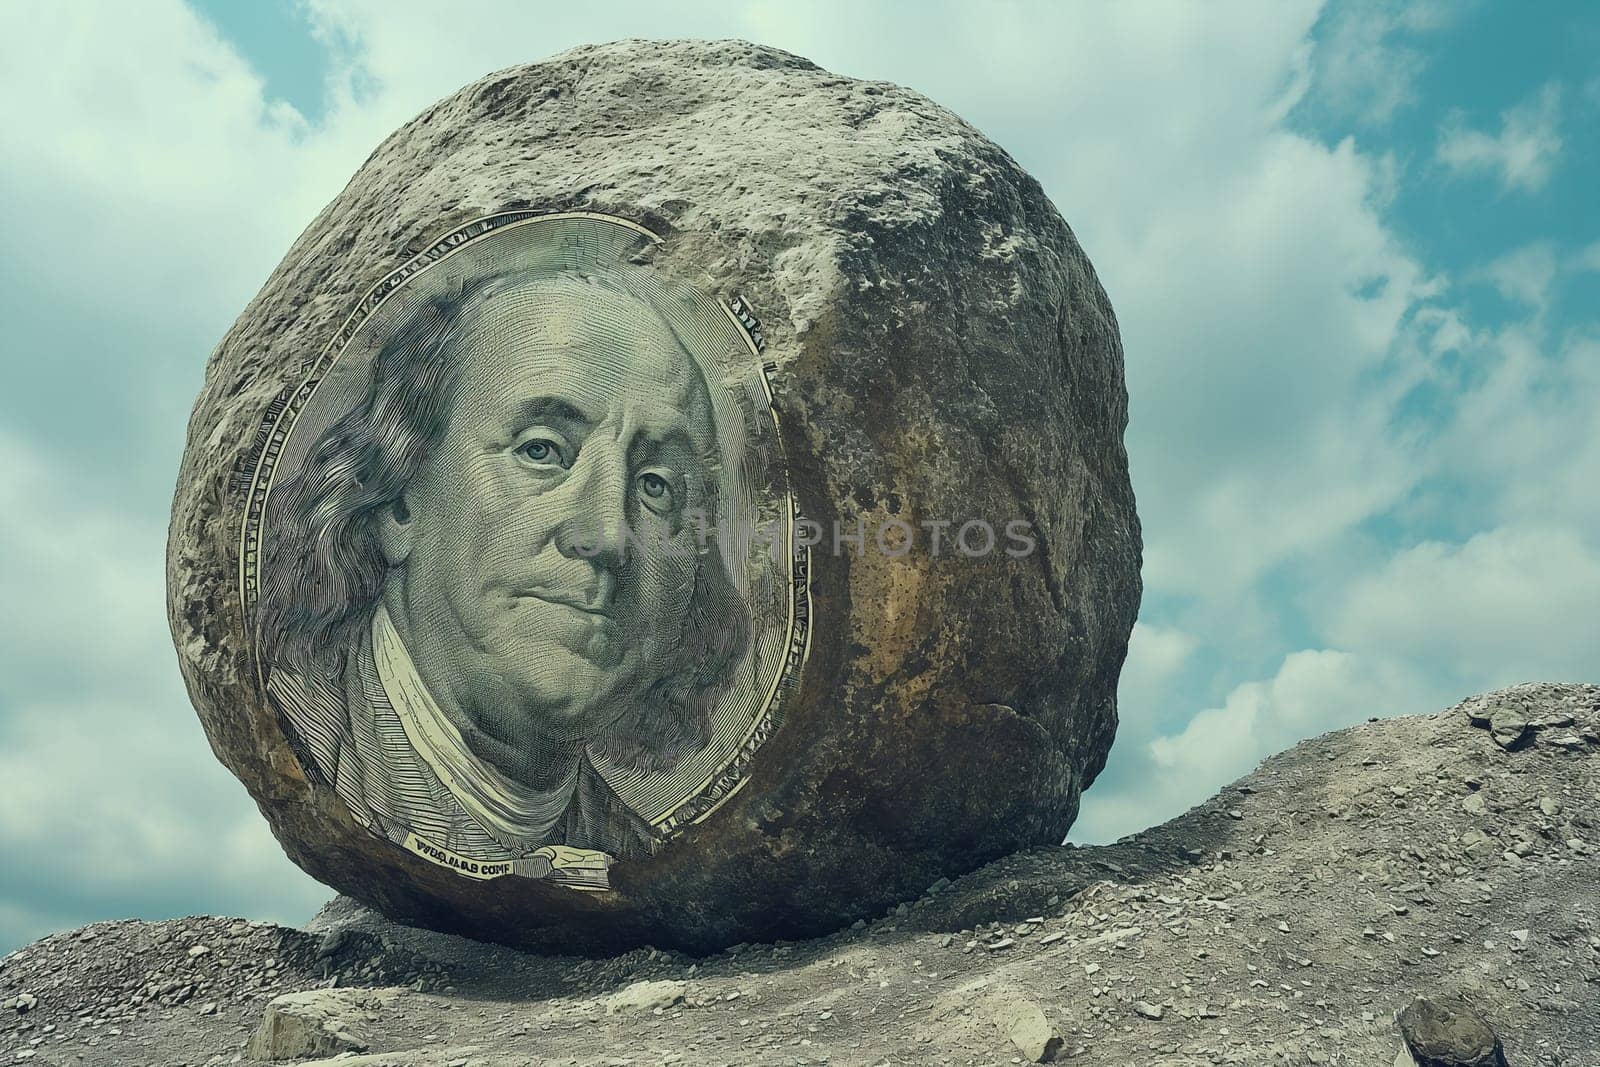 A man on a mountainside next to a stone with a dollar symbol. by Sd28DimoN_1976